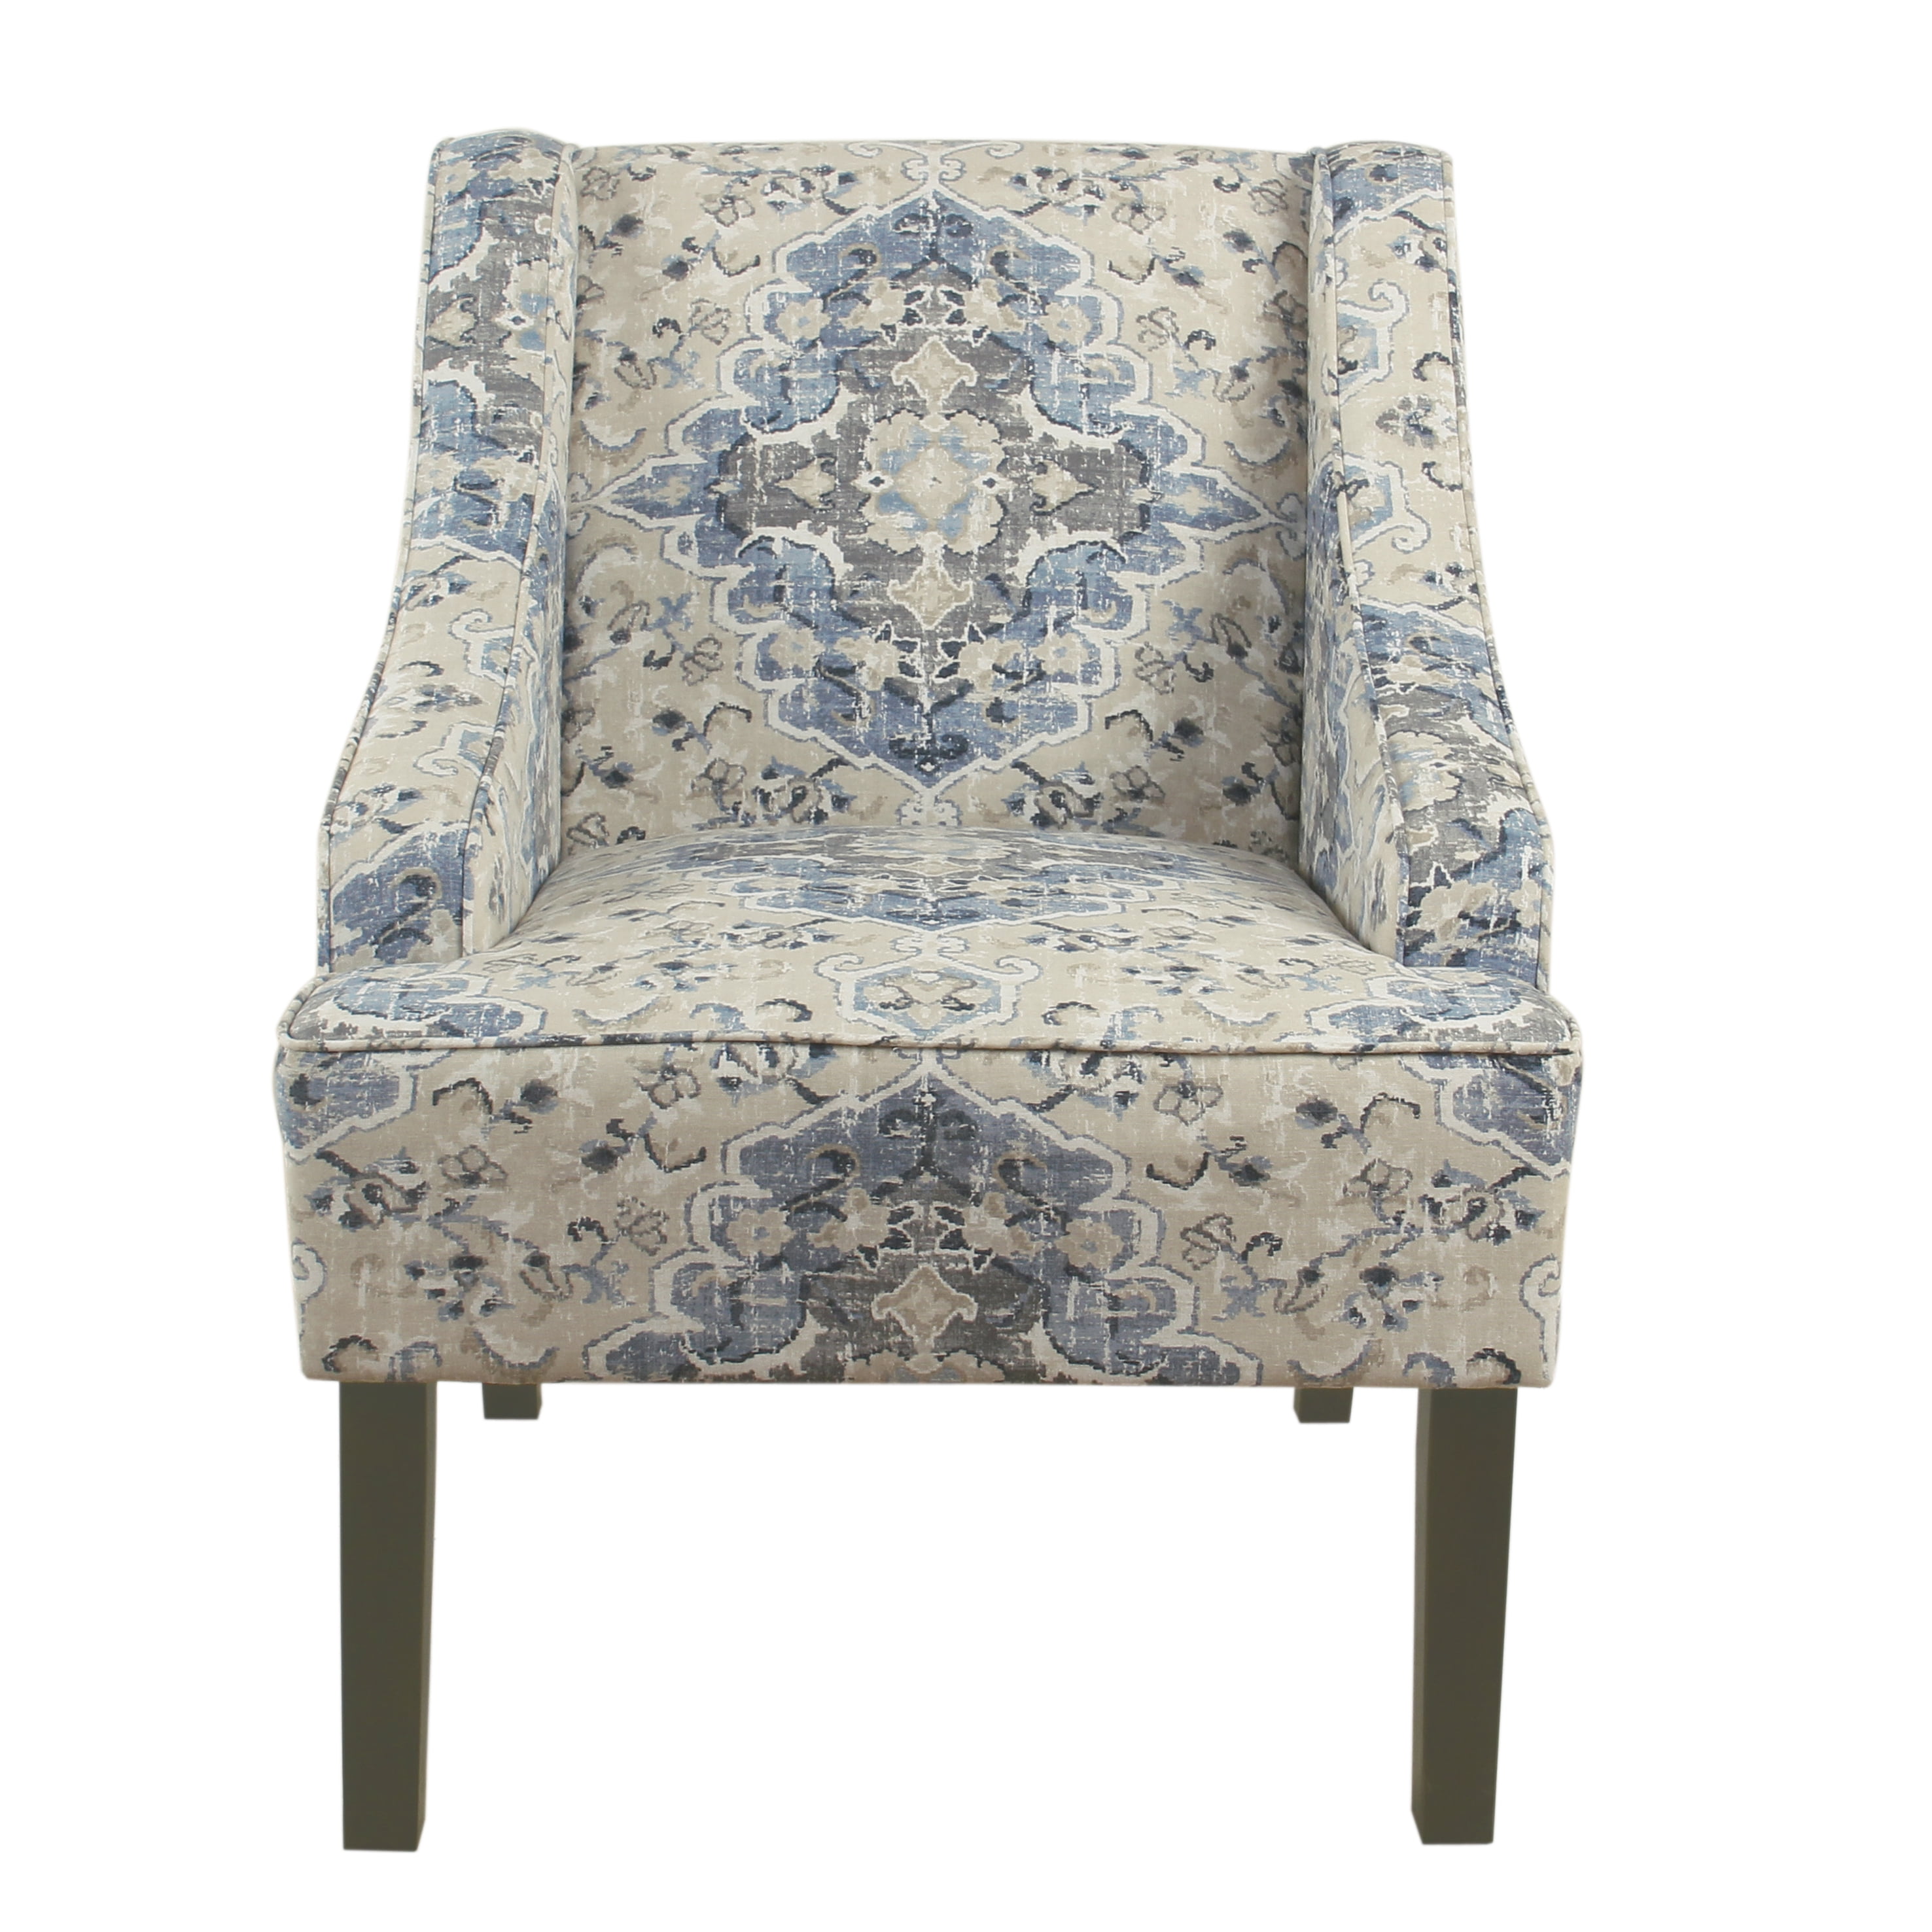 HomePop by Kinfine Fabric Upholstered Chair Grey Medallion Barrel Shaped Accent Chair